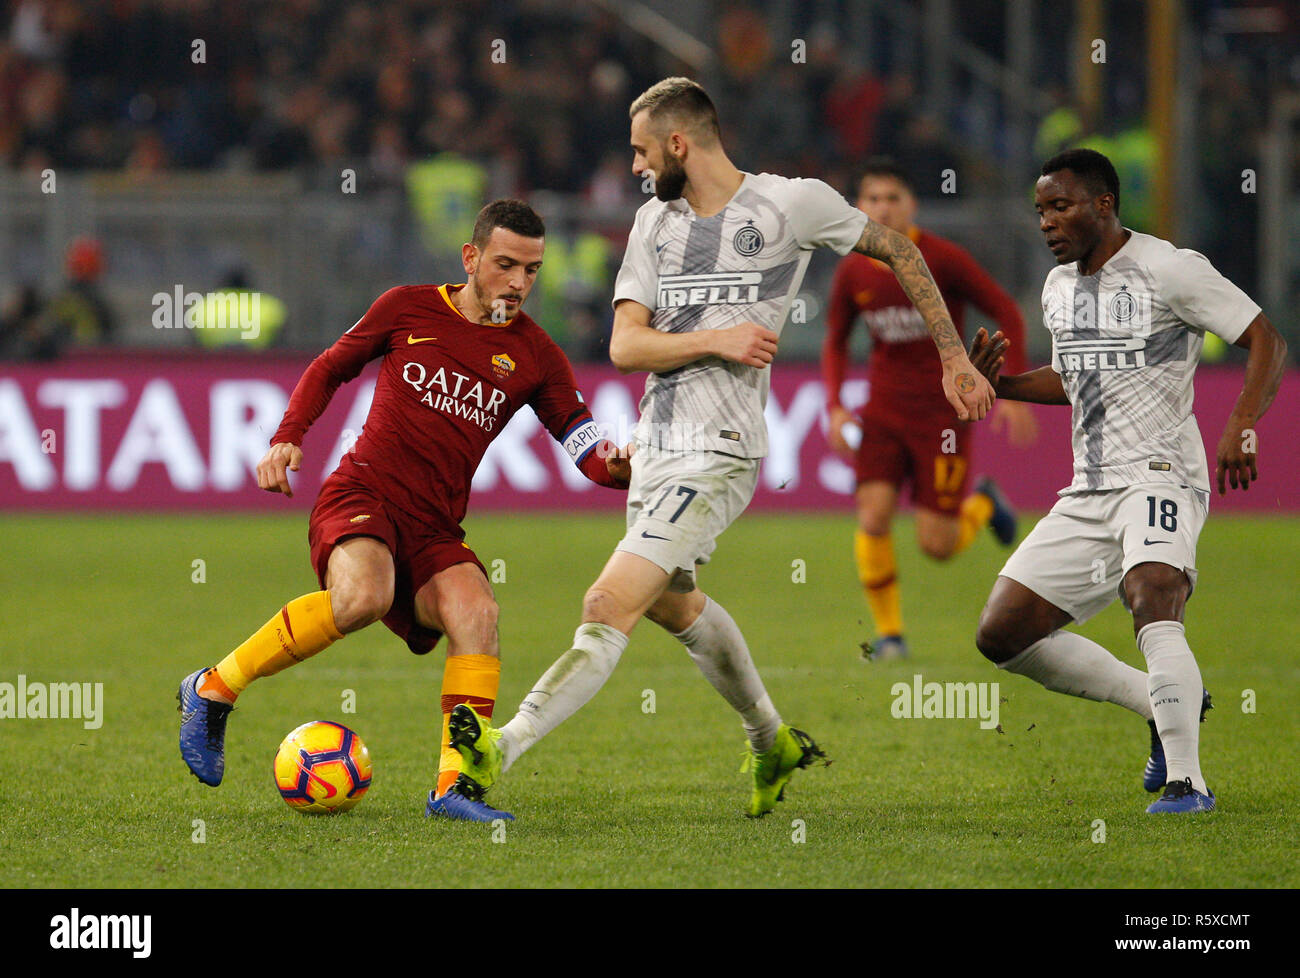 Rome, Italy. 2nd Dec, 2018. Roma's Alessandro Florenzi, left, is challenged by Inter's Marcelo Brozovic, left, and Kwadwo Asamoah during the Serie A soccer match between Roma and Inter at the Olympic Stadium. Credit: UPDATE IMAGES/ Alamy Live News Stock Photo